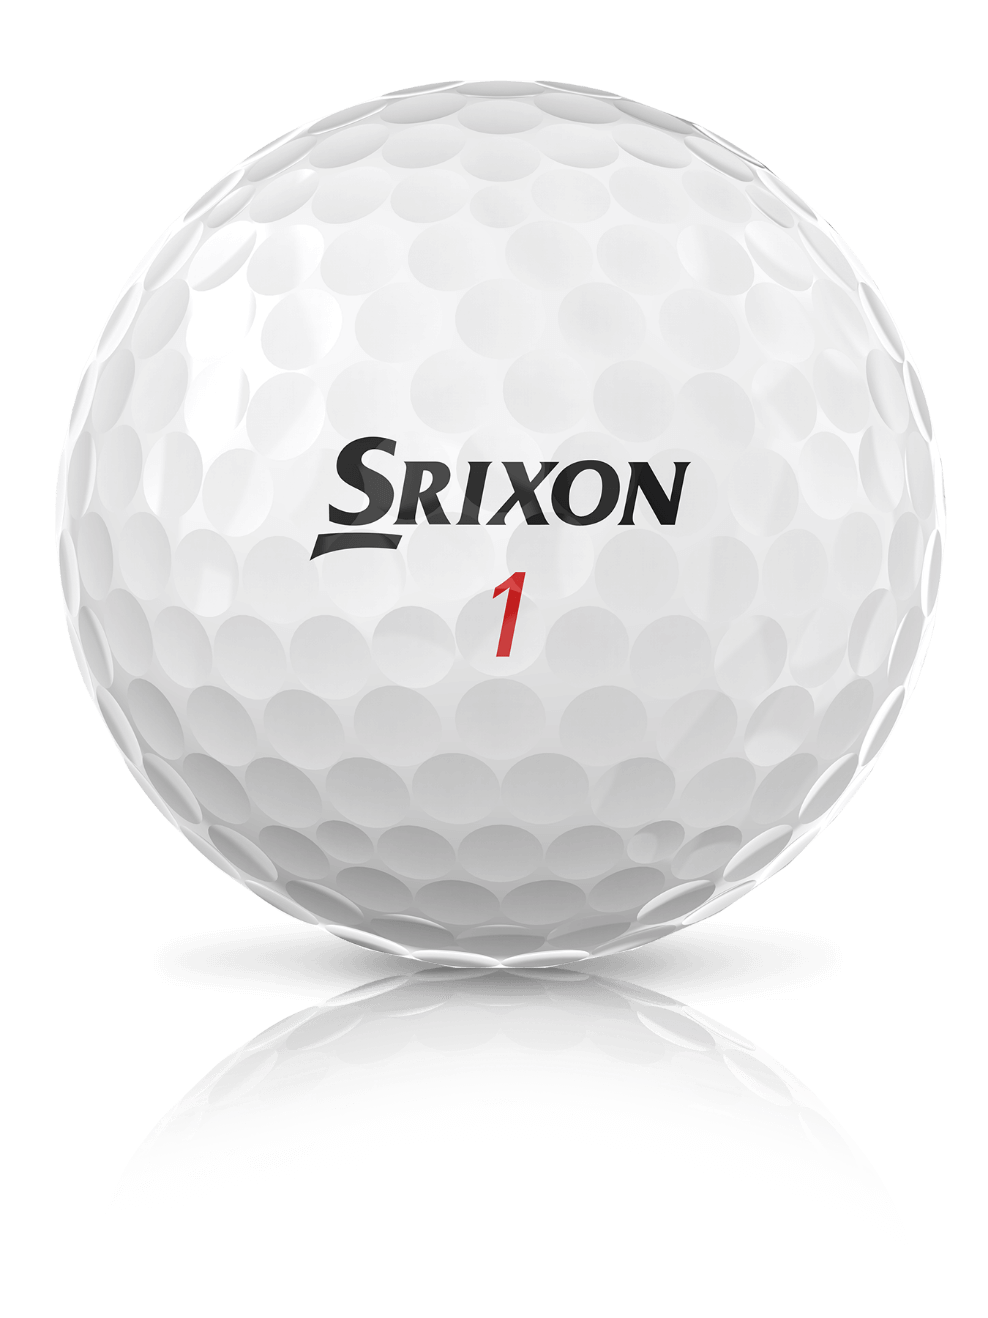 WHICH SRIXON GOLF BALL IS RIGHT FOR YOU?